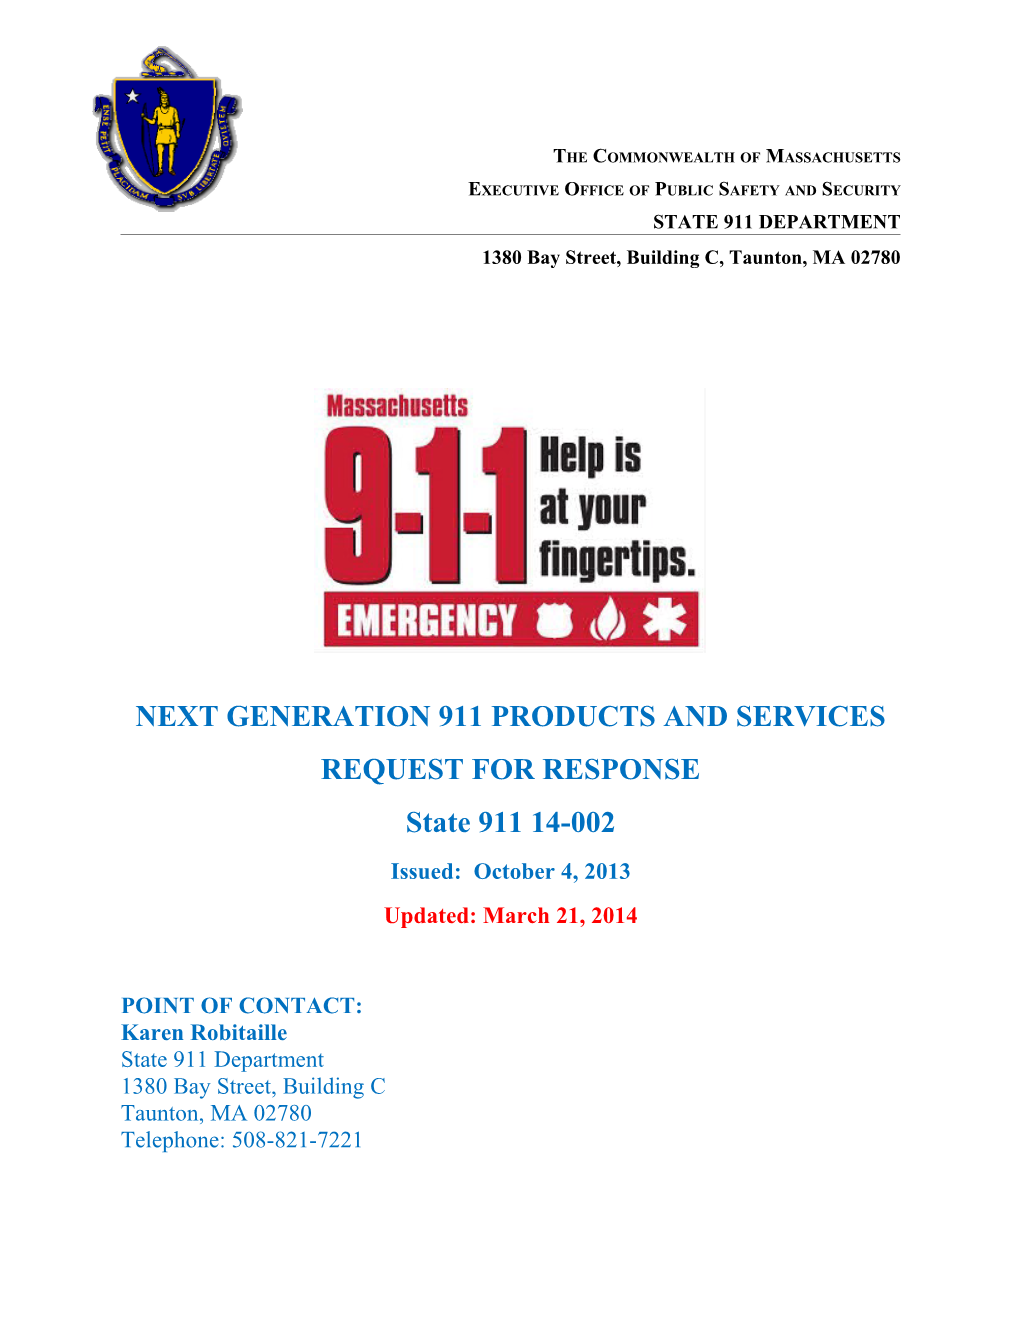 Next Generation 9-1-1 Emergency Communications System Request for Response